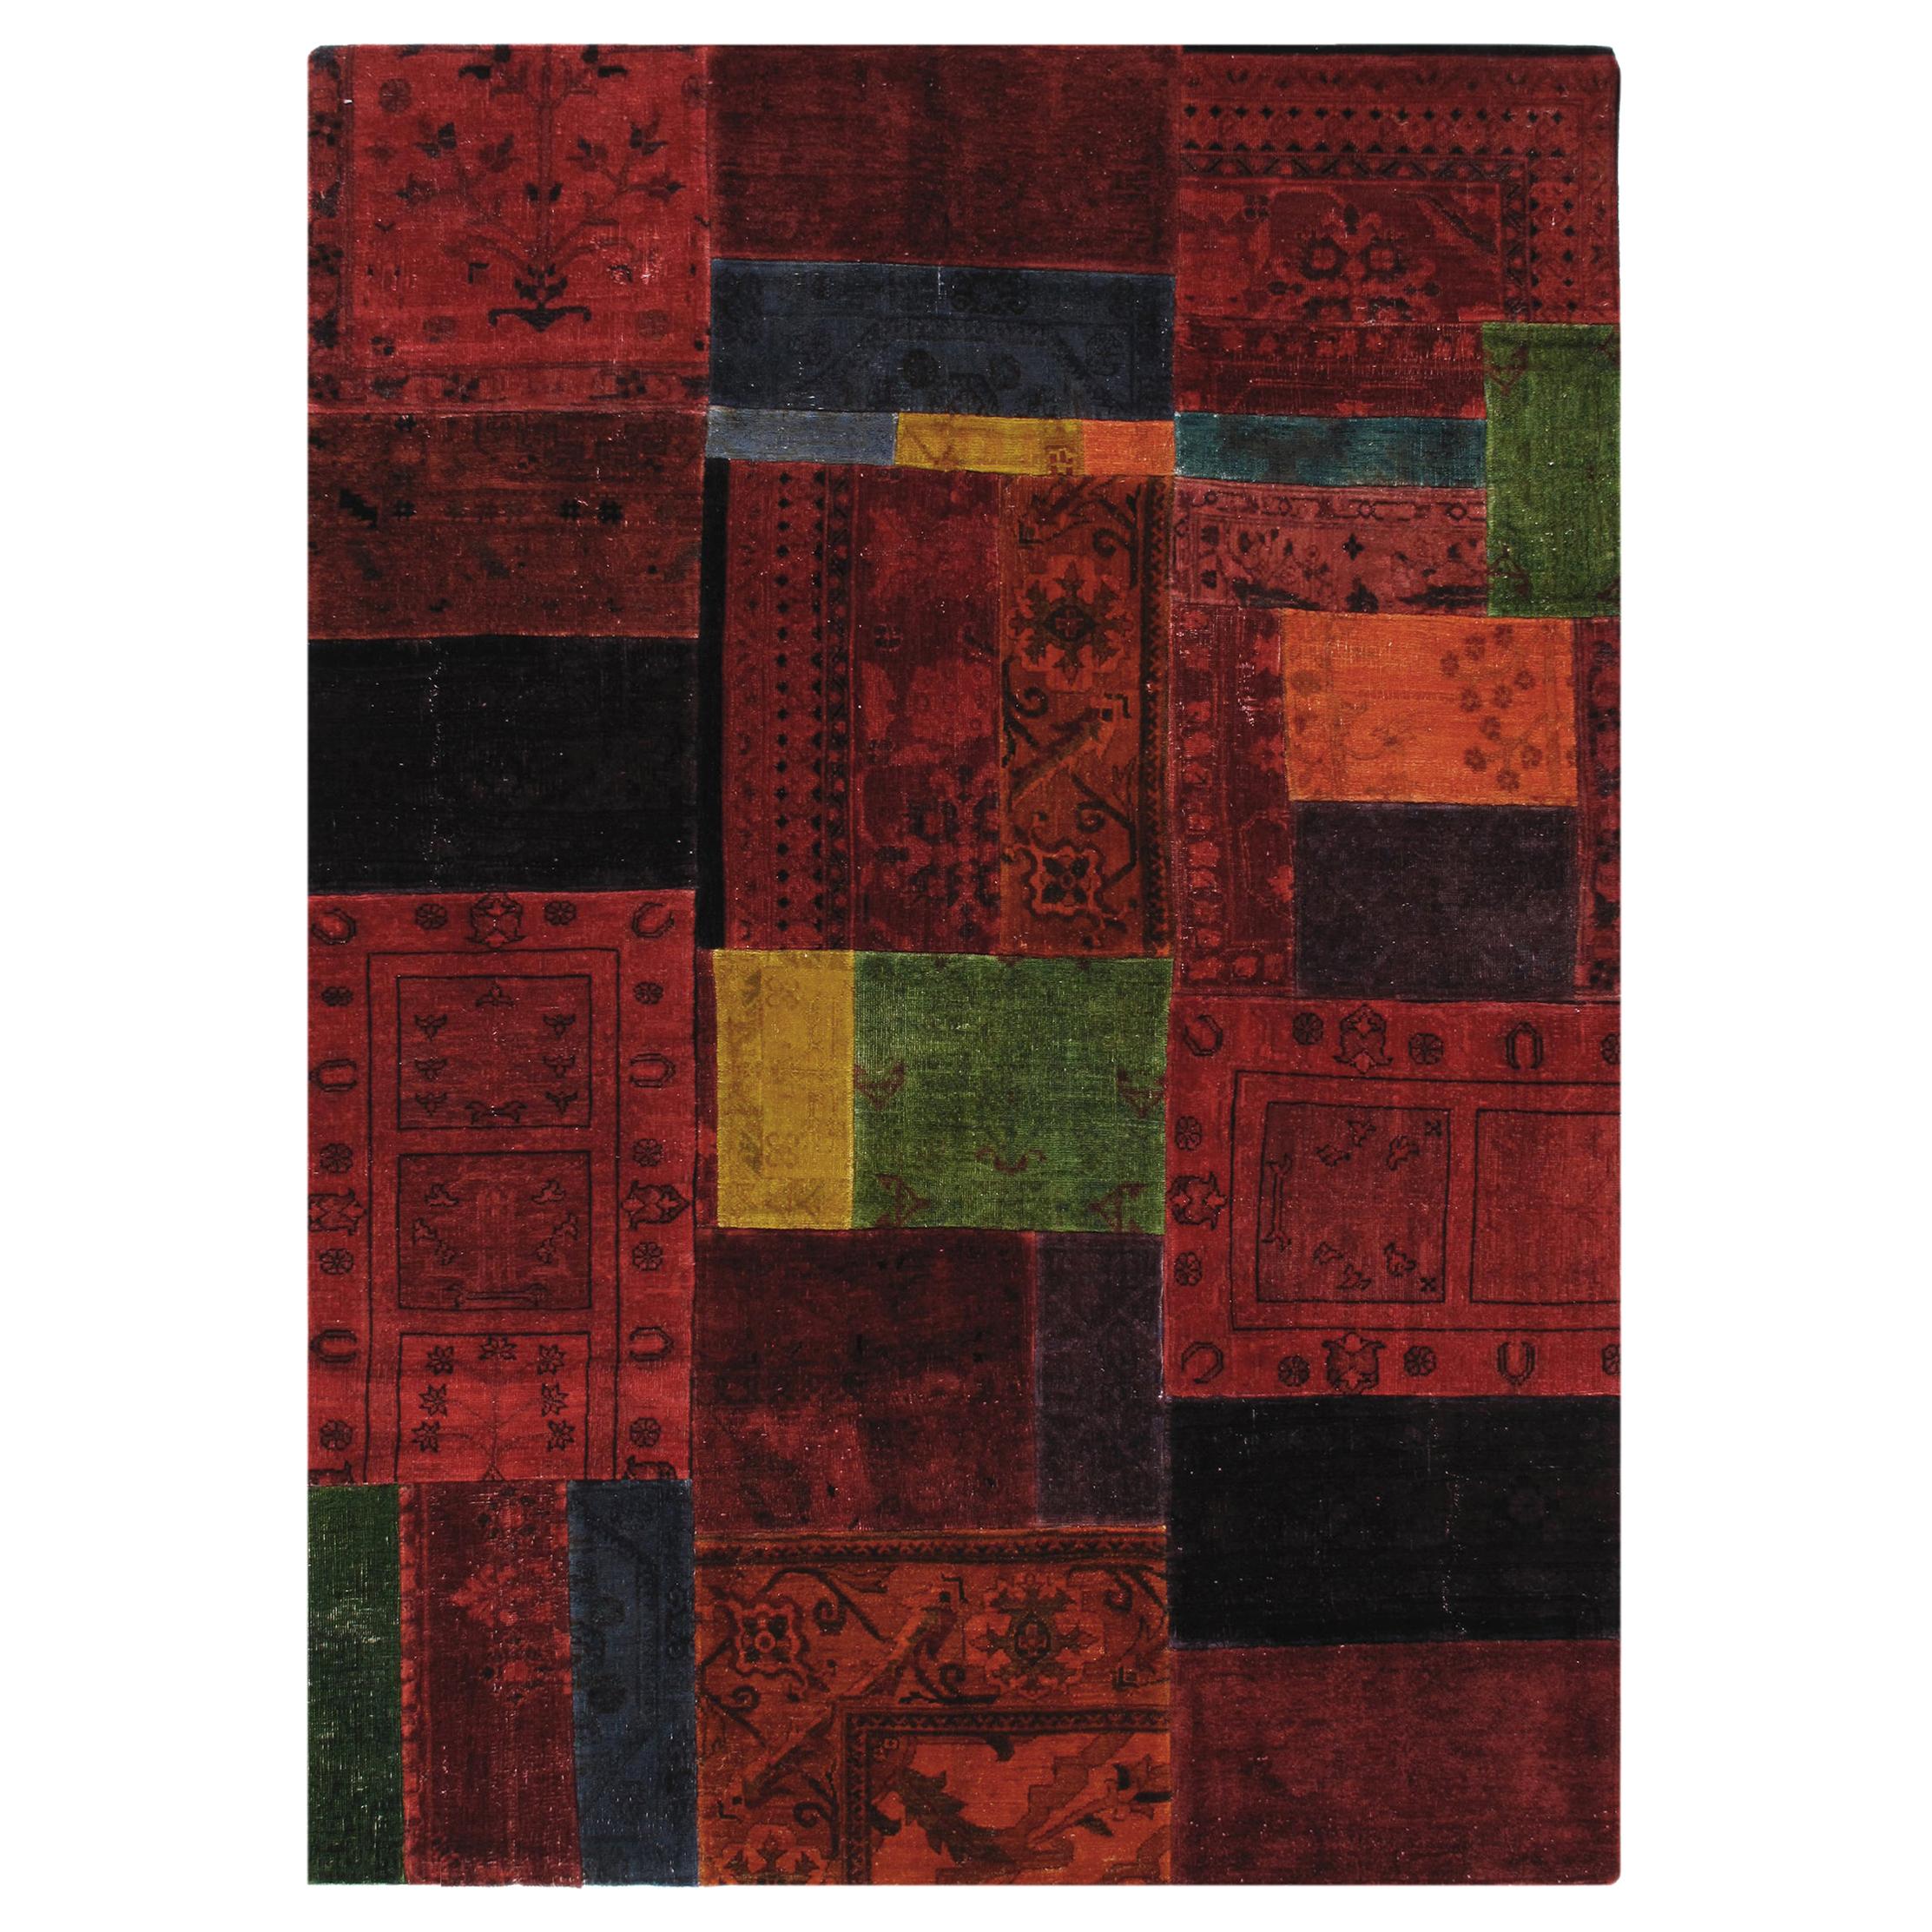 Vintage Mid-Century Modern Handknotted Patchwork Rug in Red Tones